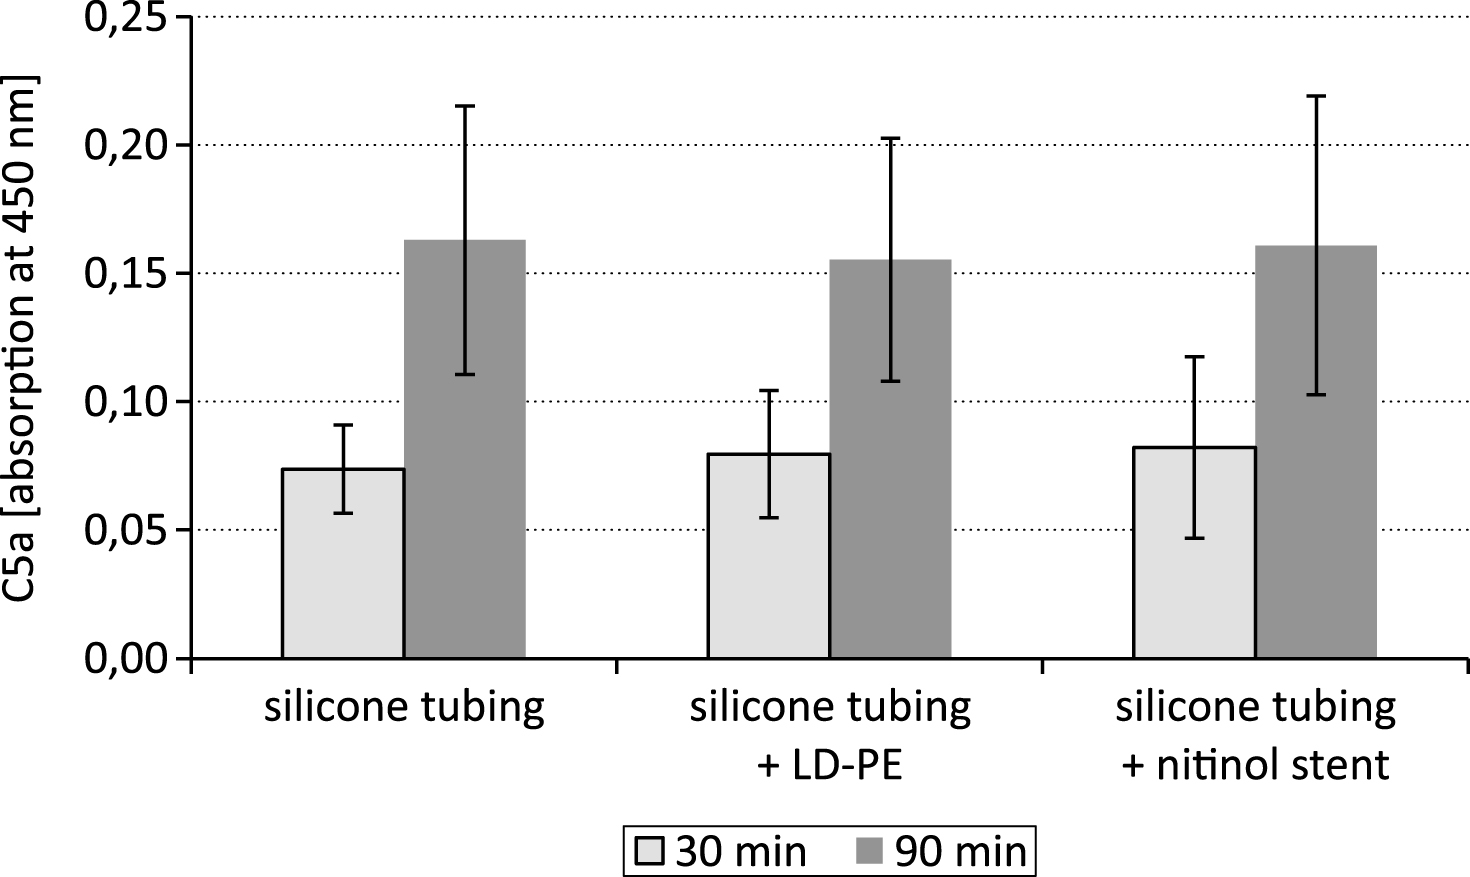 C5a content after testing a silicone tubing with integrated samples (LD-PE: low density polyethylene tube, nitinol stent) in a closed loop model; n = 6.